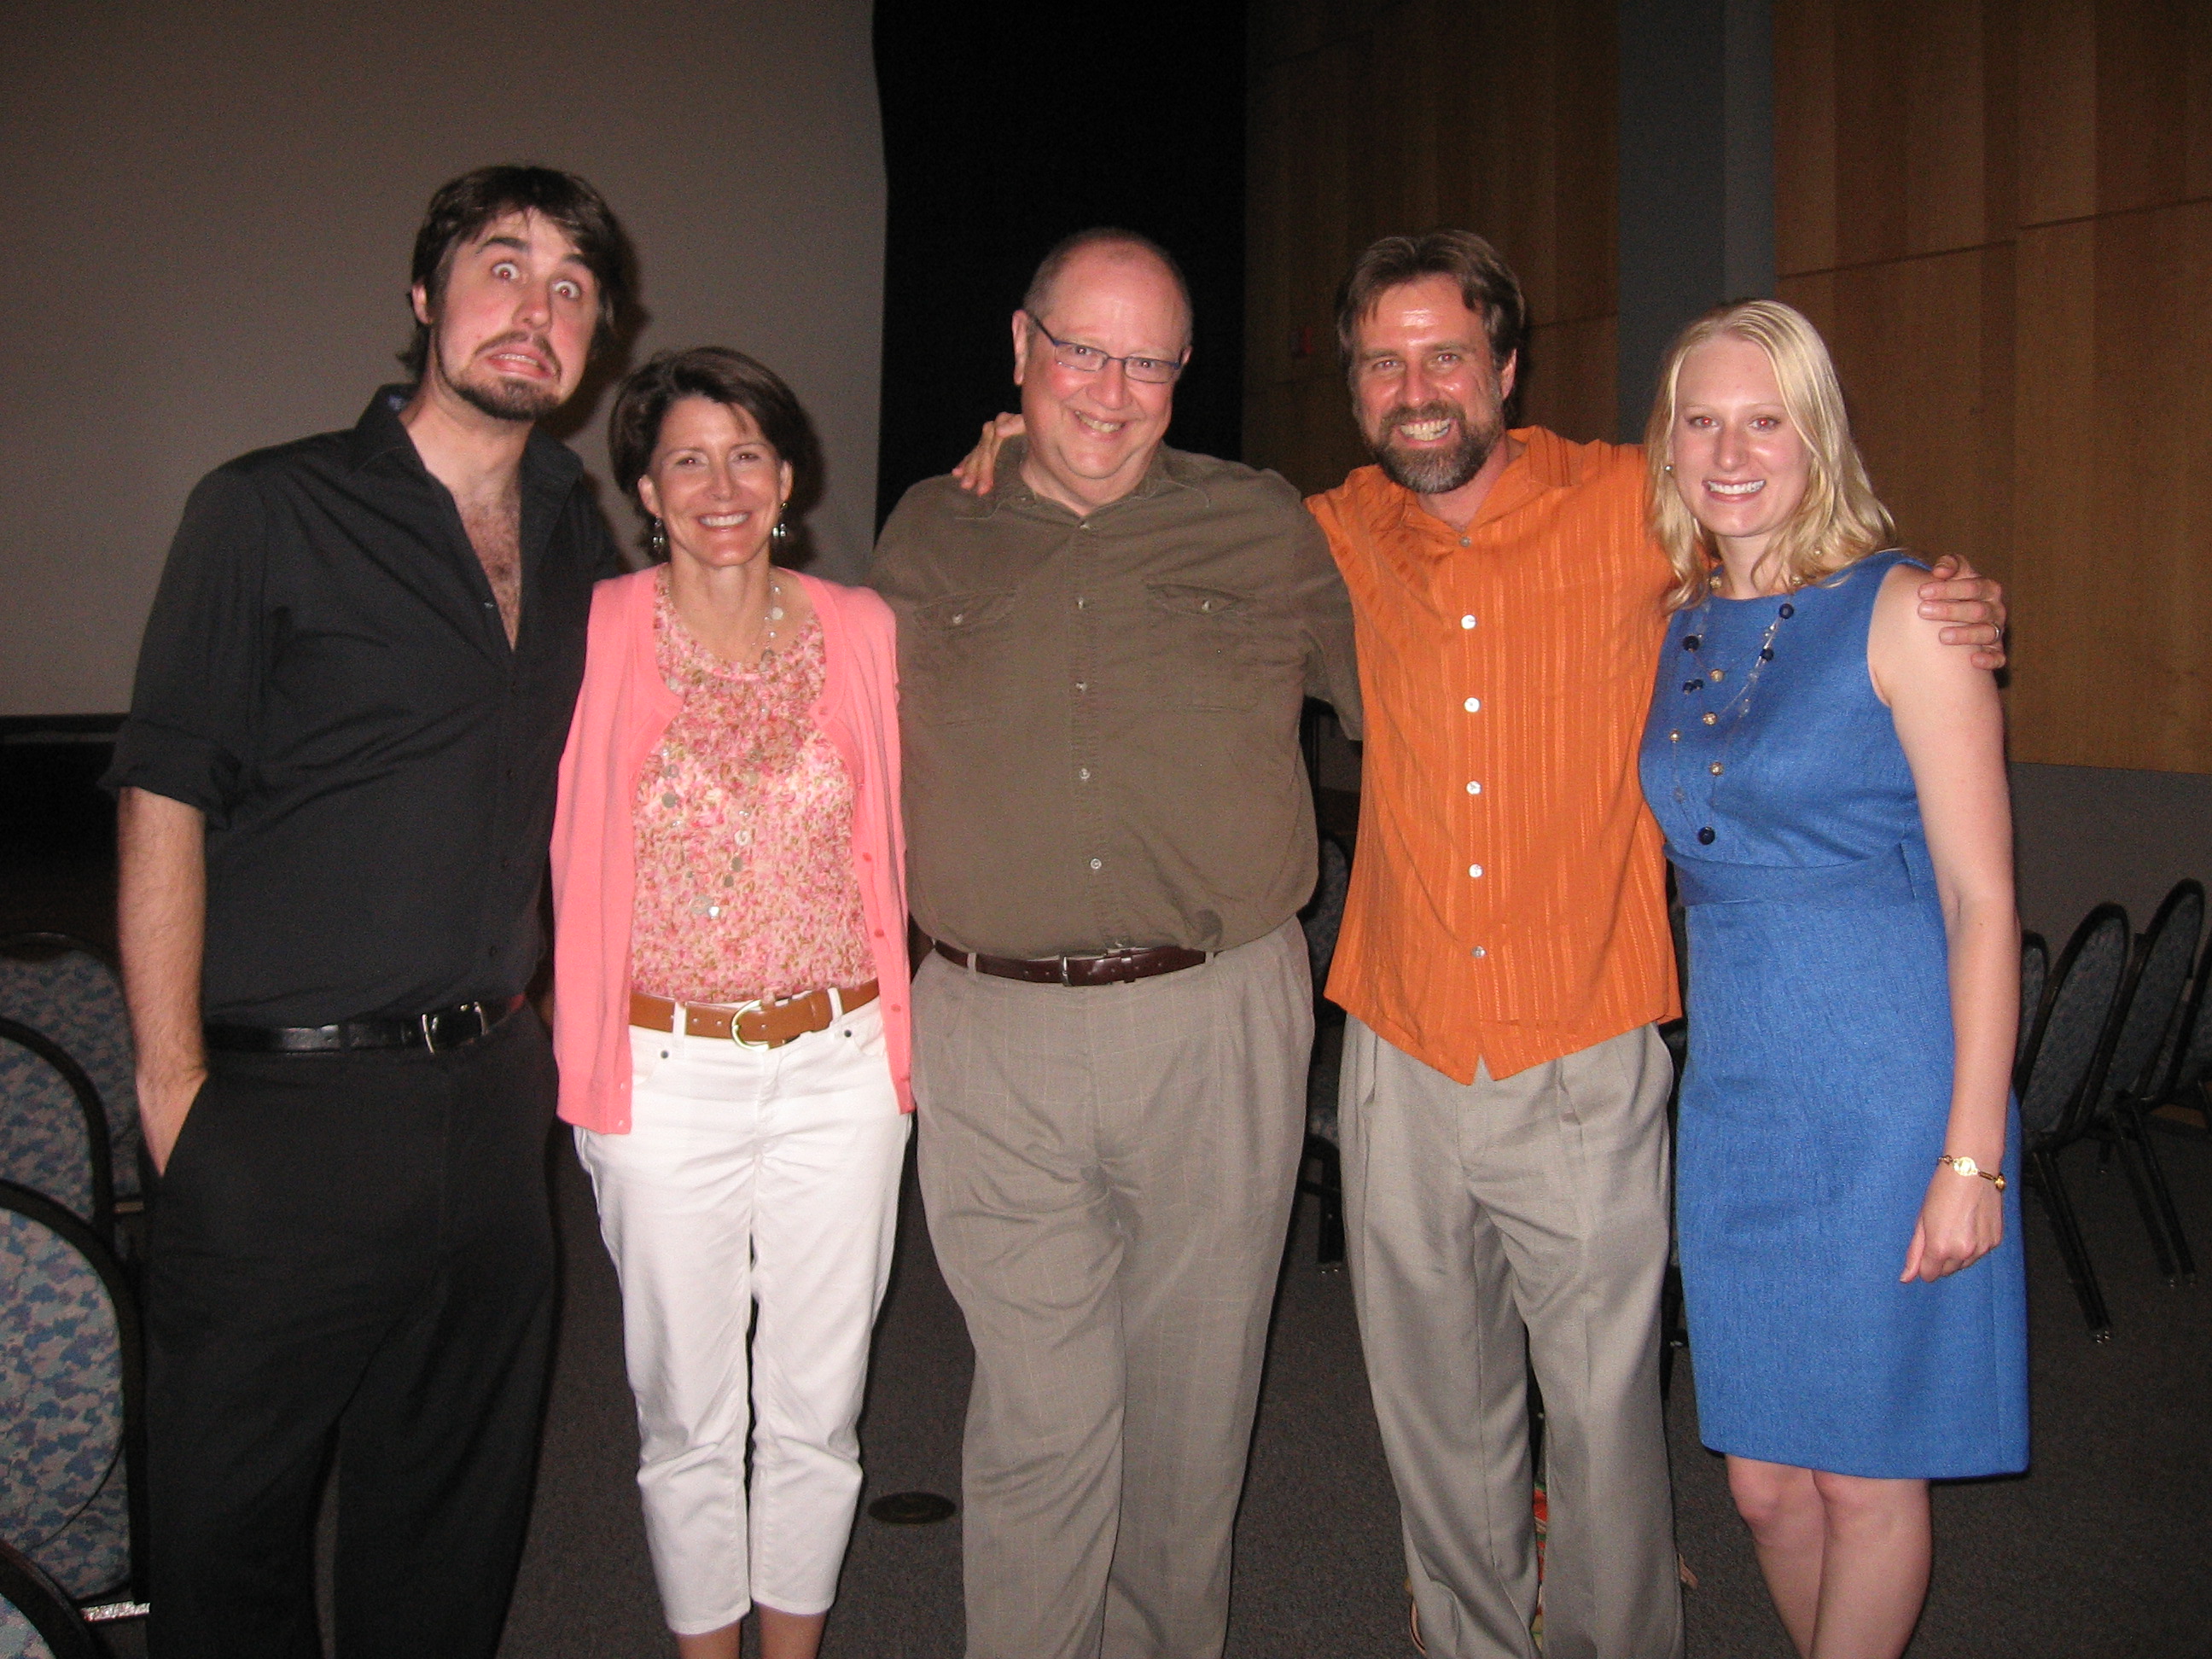 Thomas Baumgardner, Frances Mitchell, Chris Hull, Scott Rollins, and Annie Lewis at the premiere of DESULTORY RESEARCH AT THE OATES LAB Williamsburg, VA July 2011